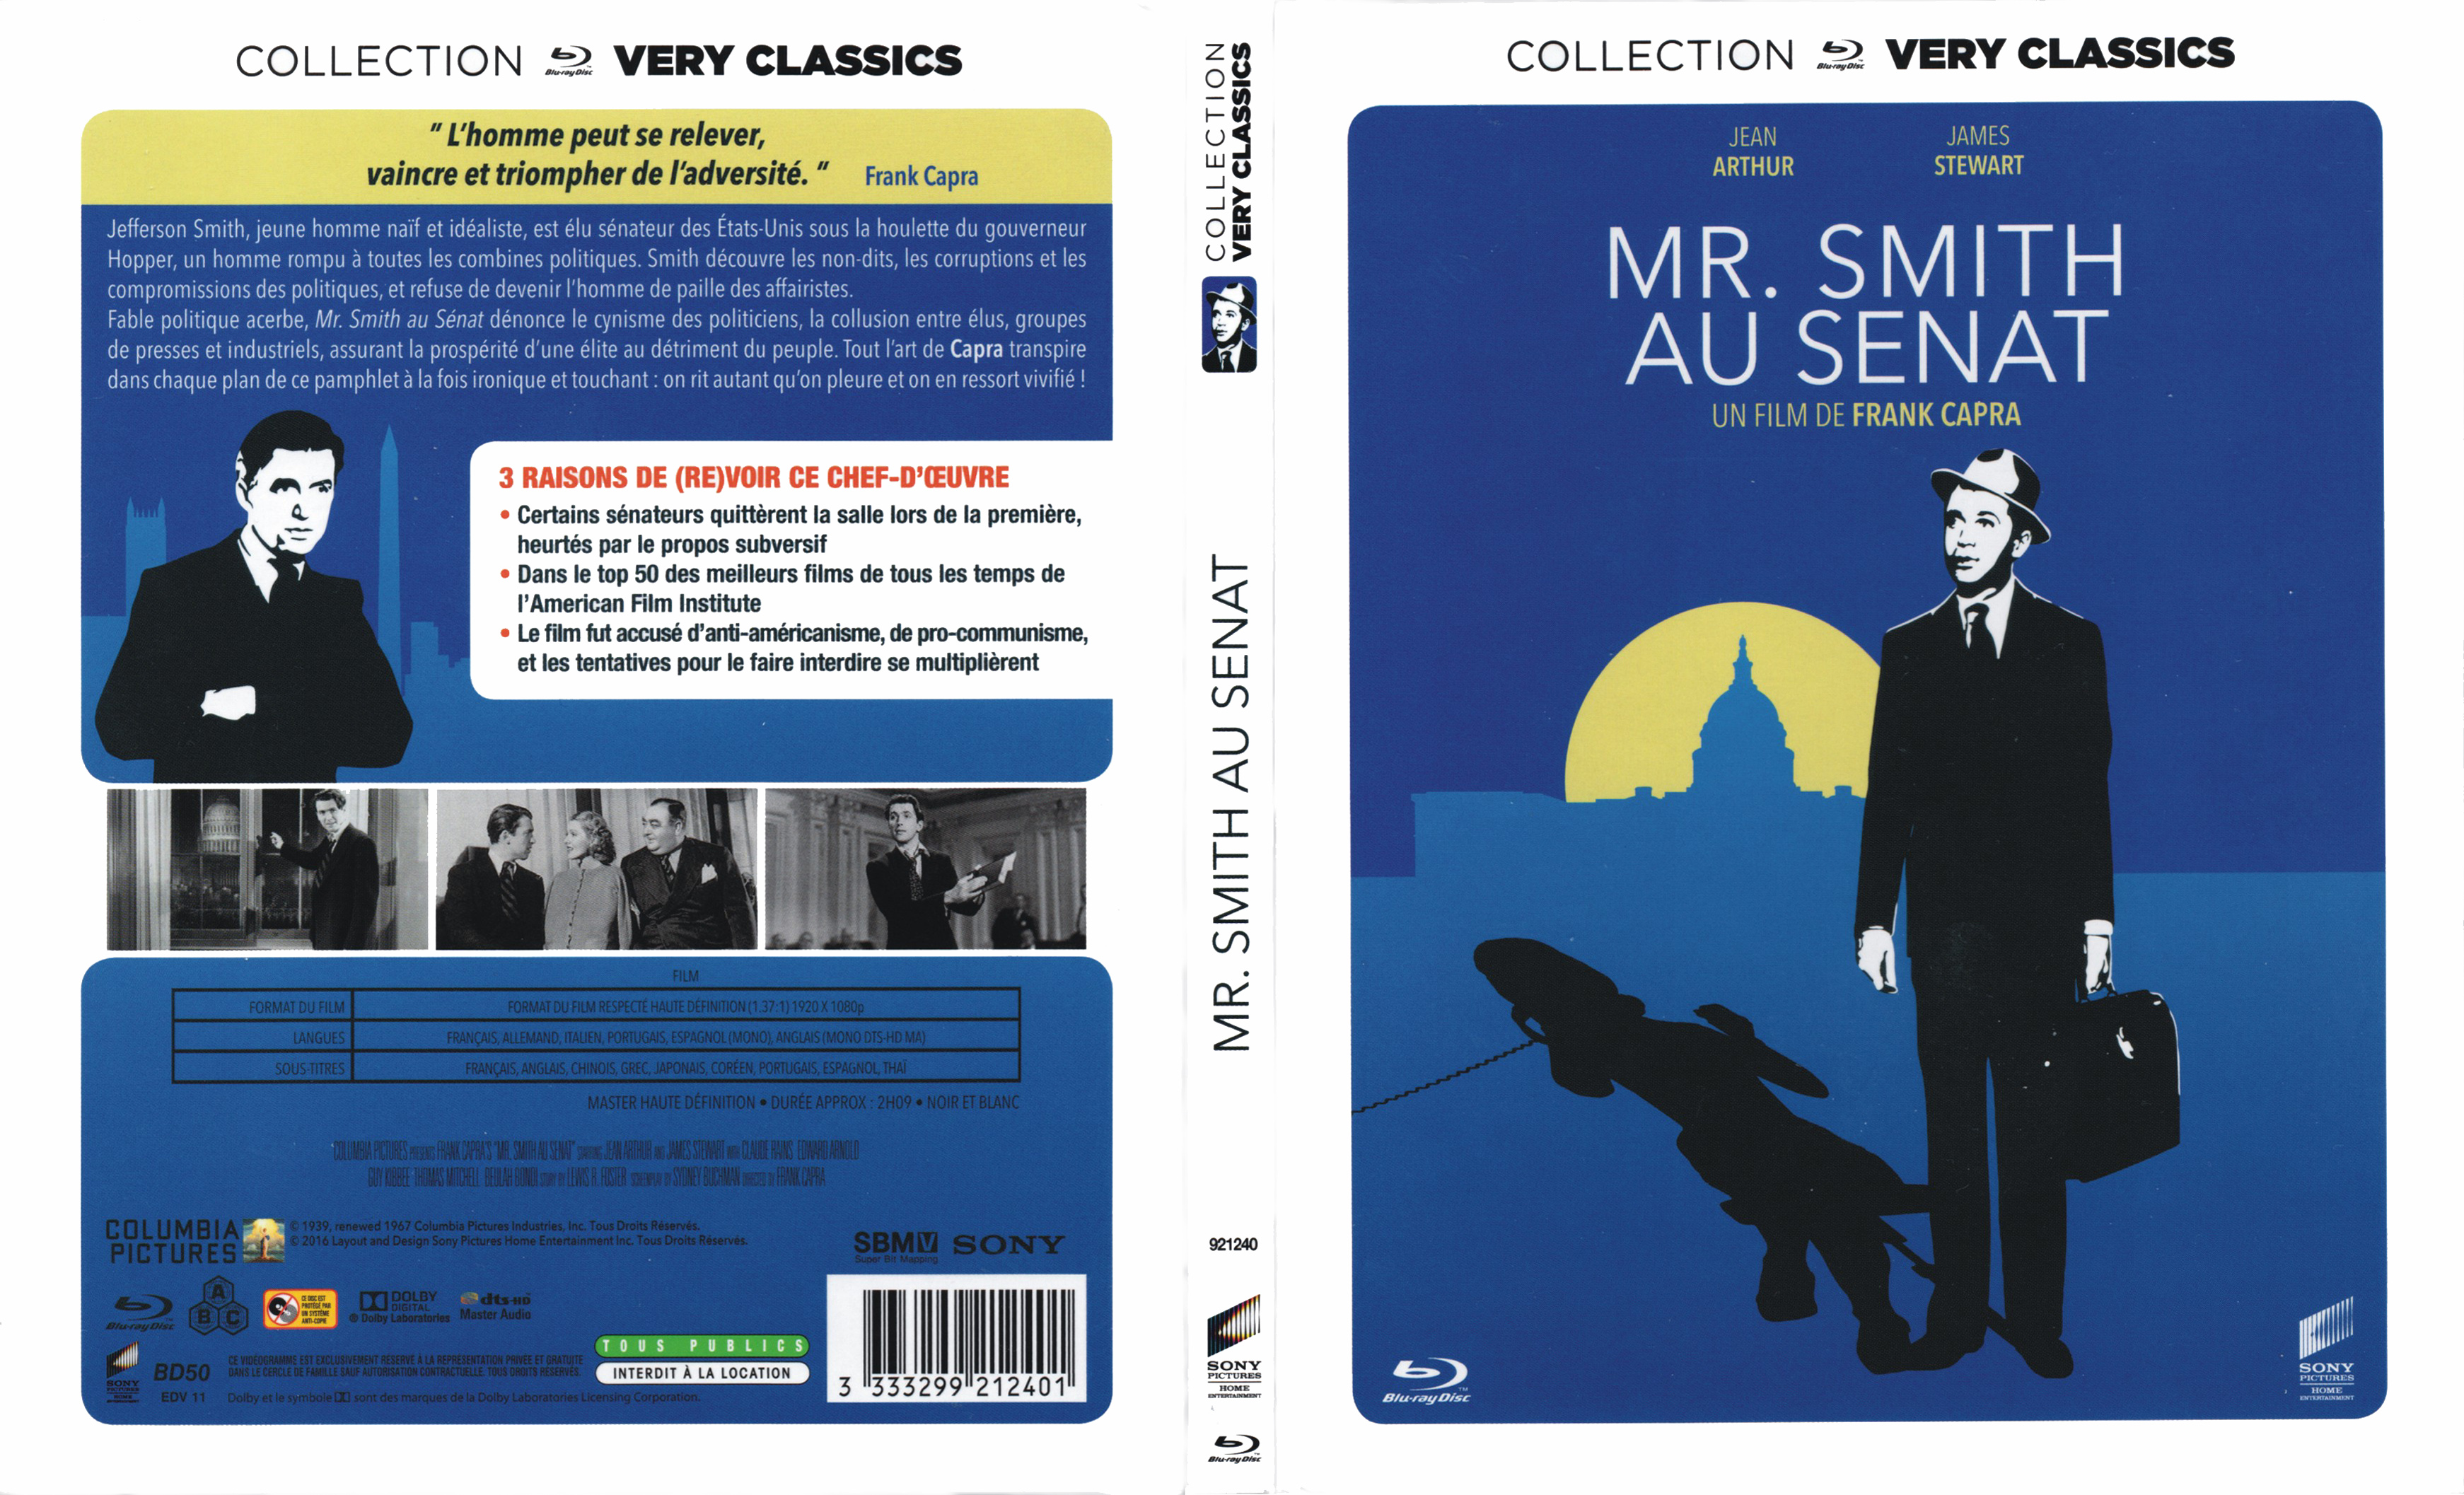 Jaquette DVD Mr Smith au snat (BLU-RAY)